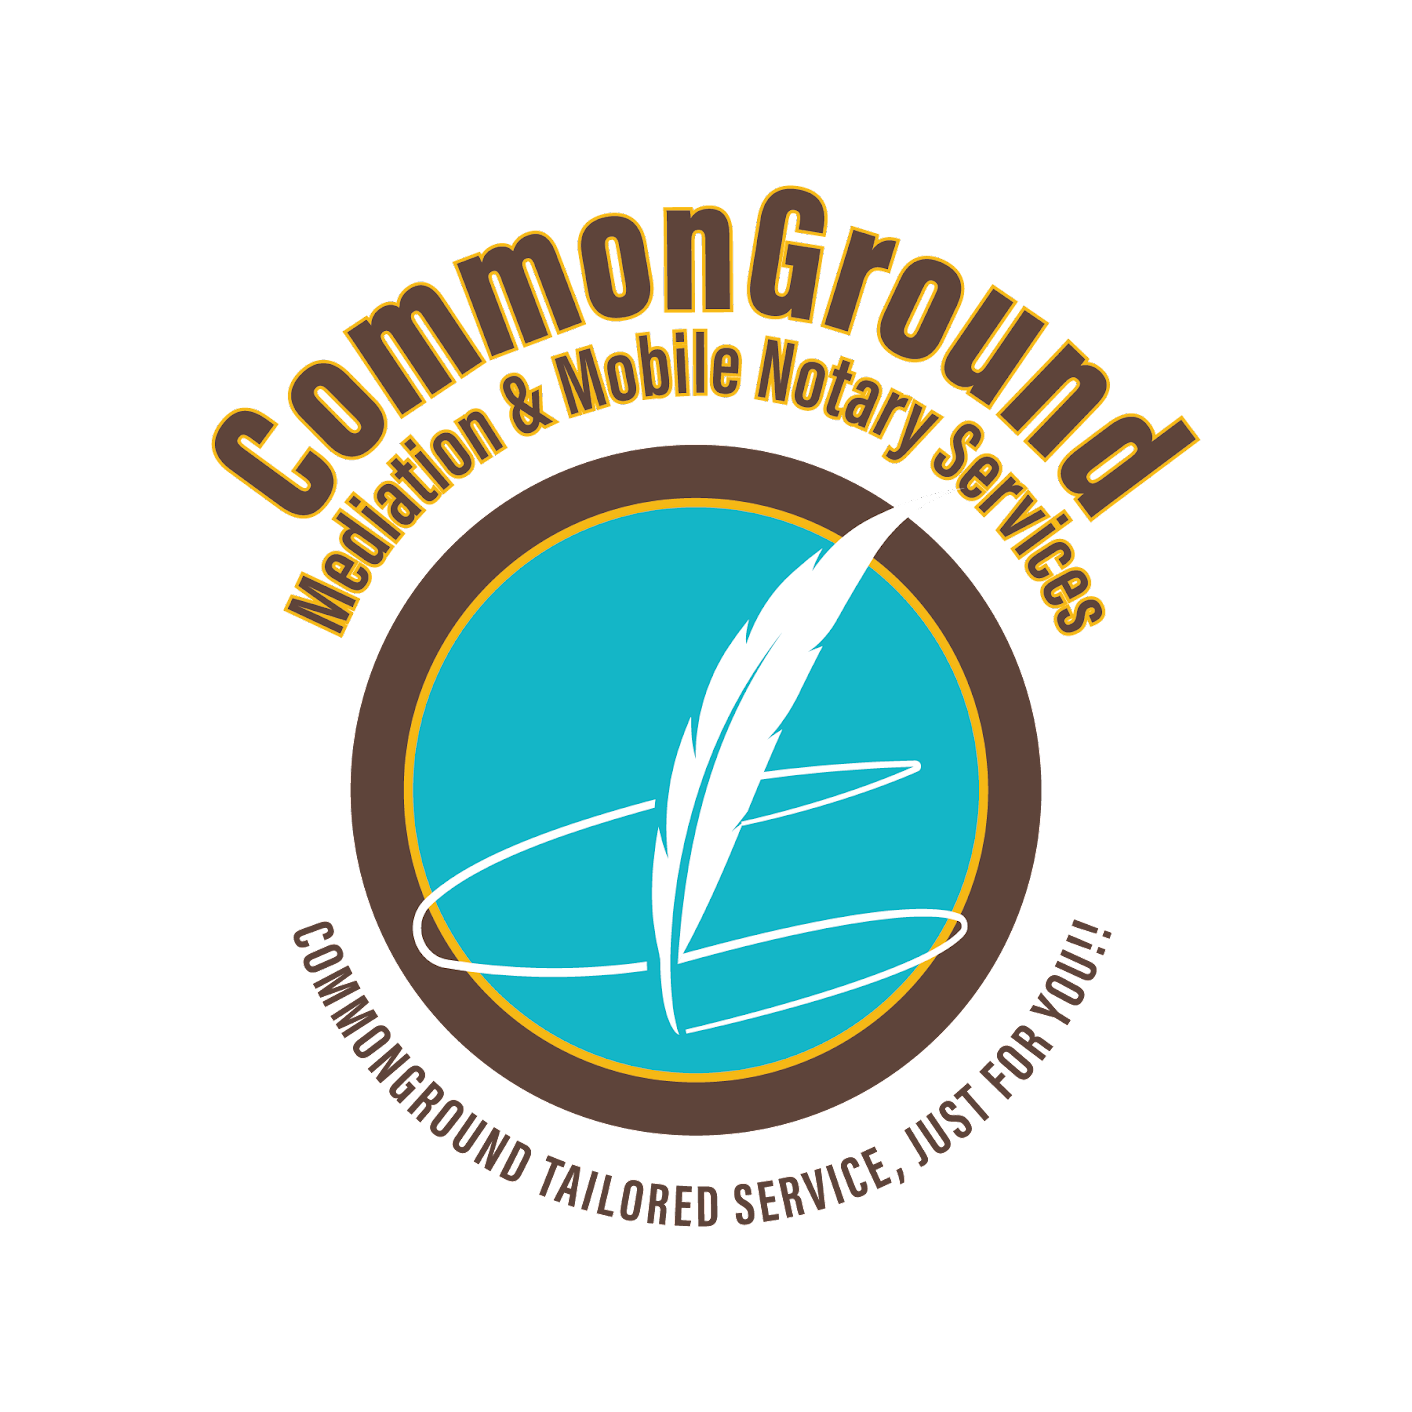 CommonGround Mobile Notary Service Logo